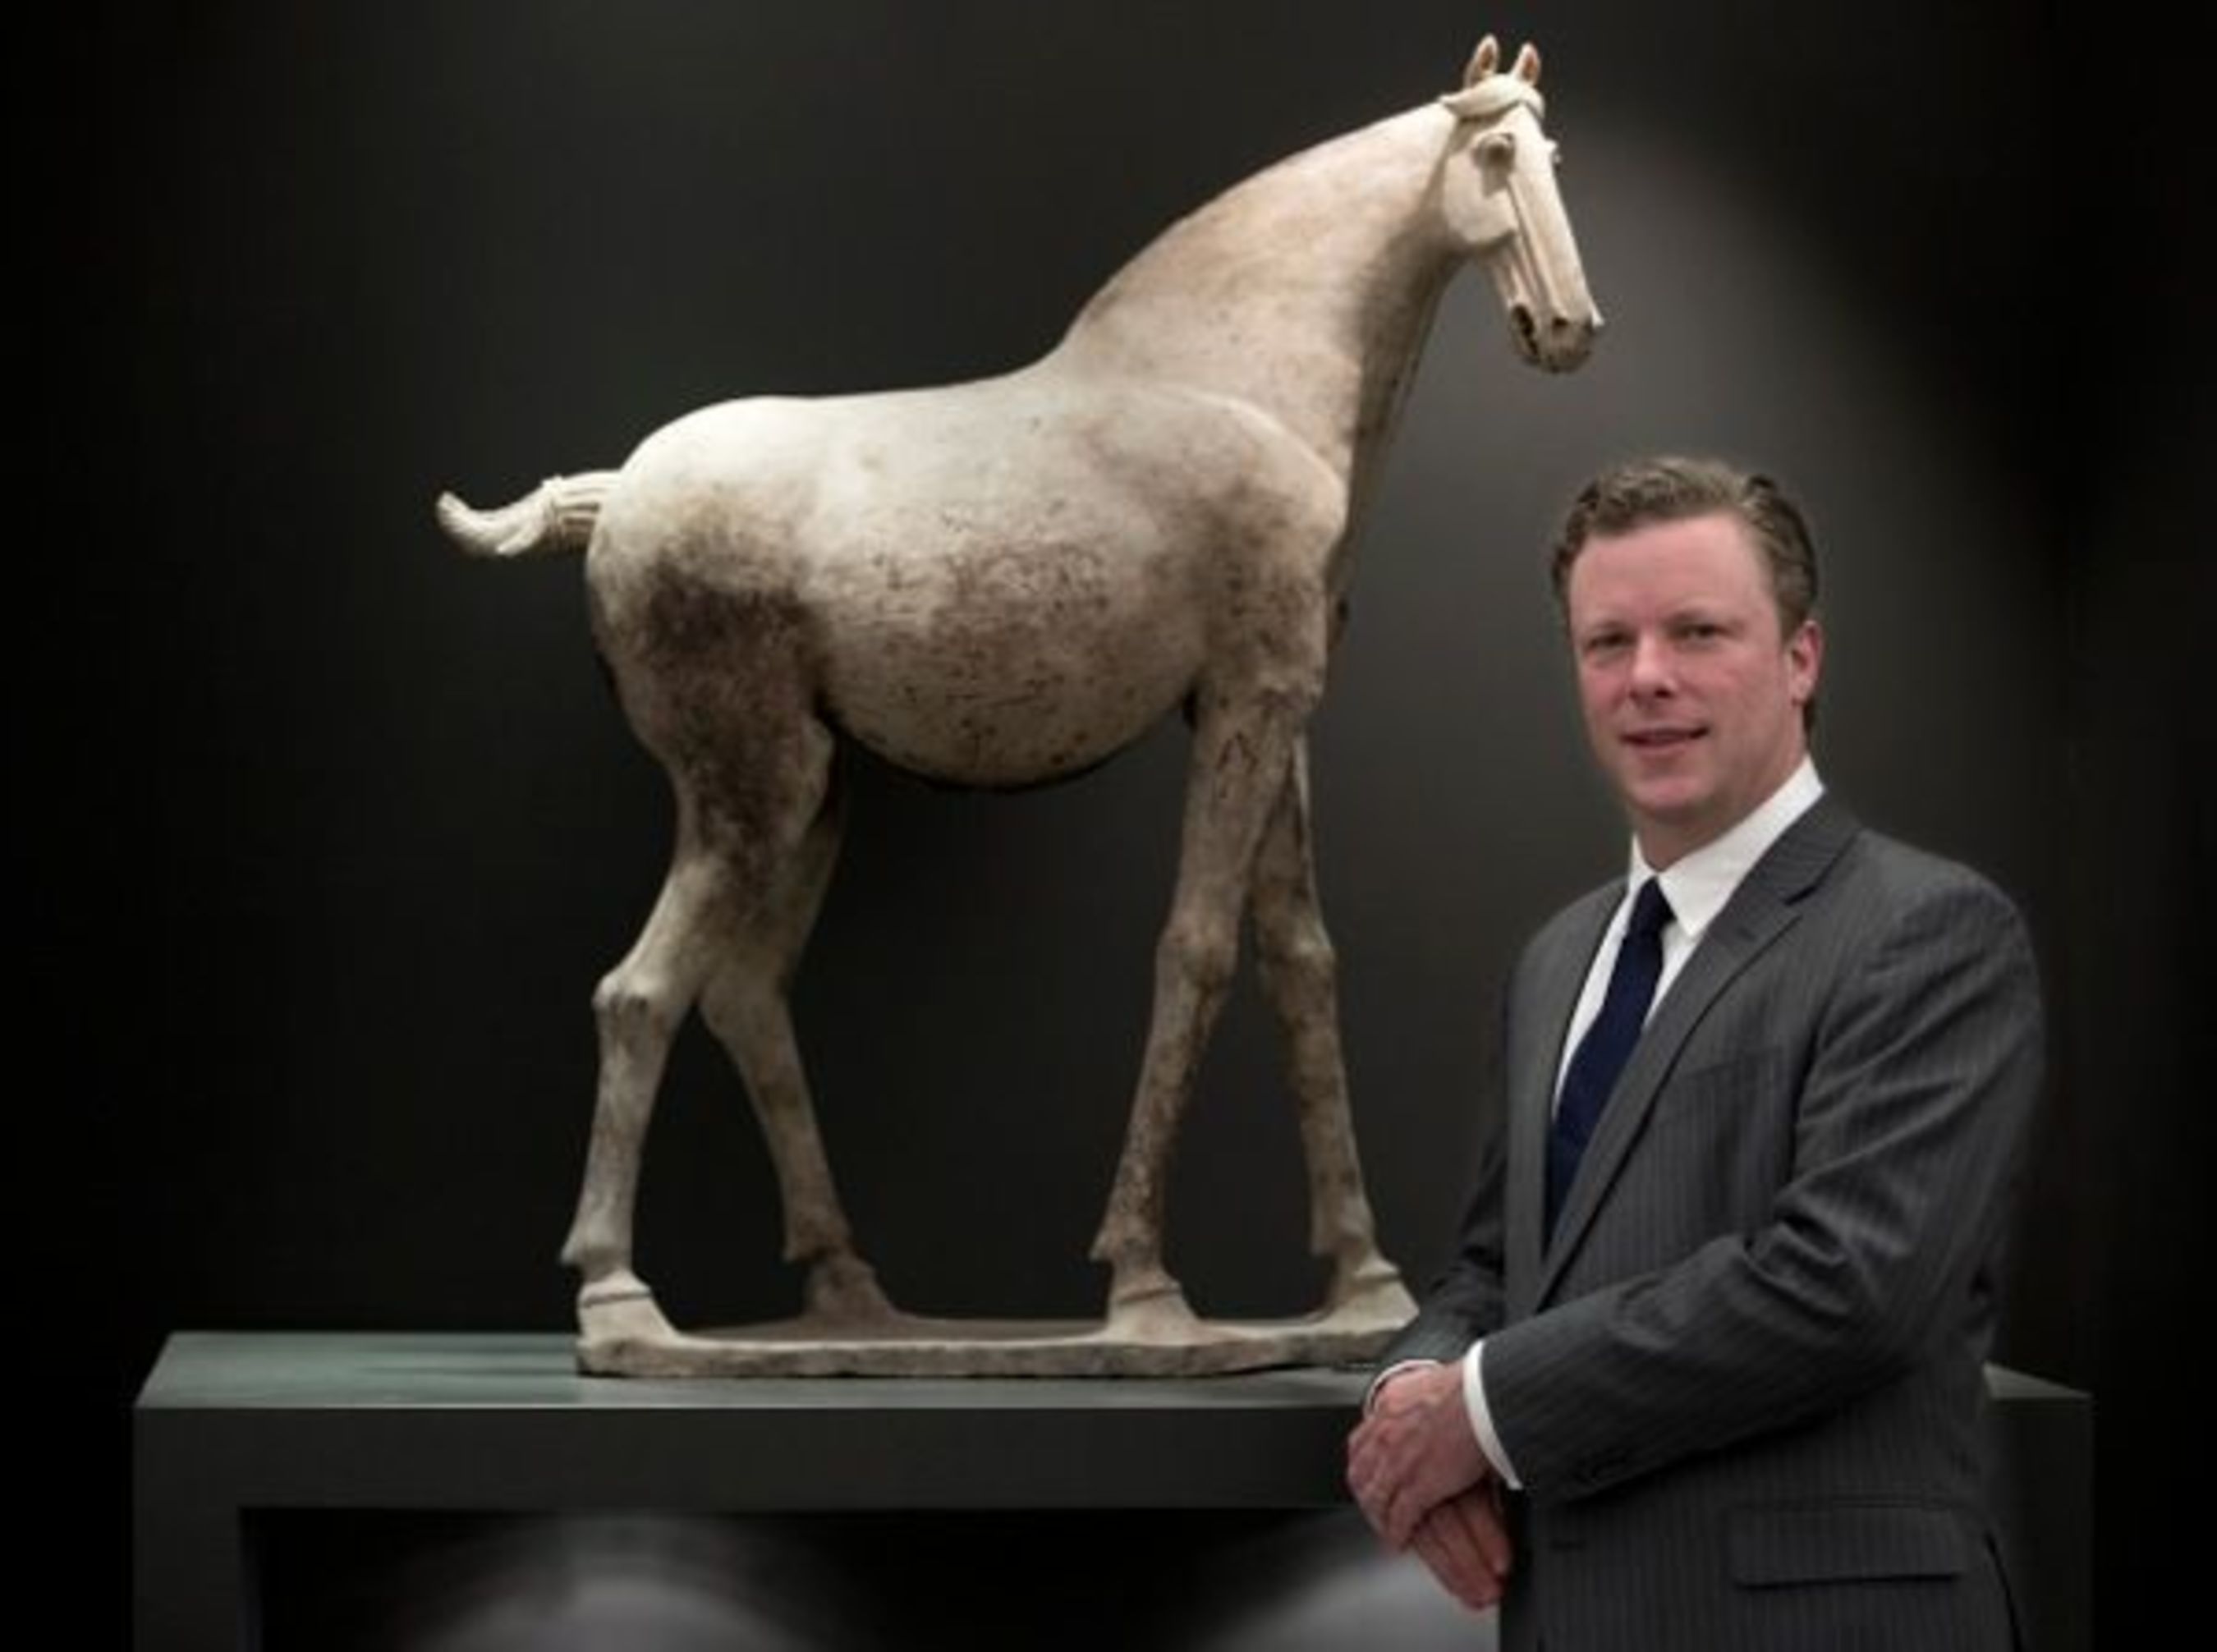 Henry Blundell, founder and CEO of MasterArt. Photograph: Harry Heuts (PRNewsFoto/Art Content)